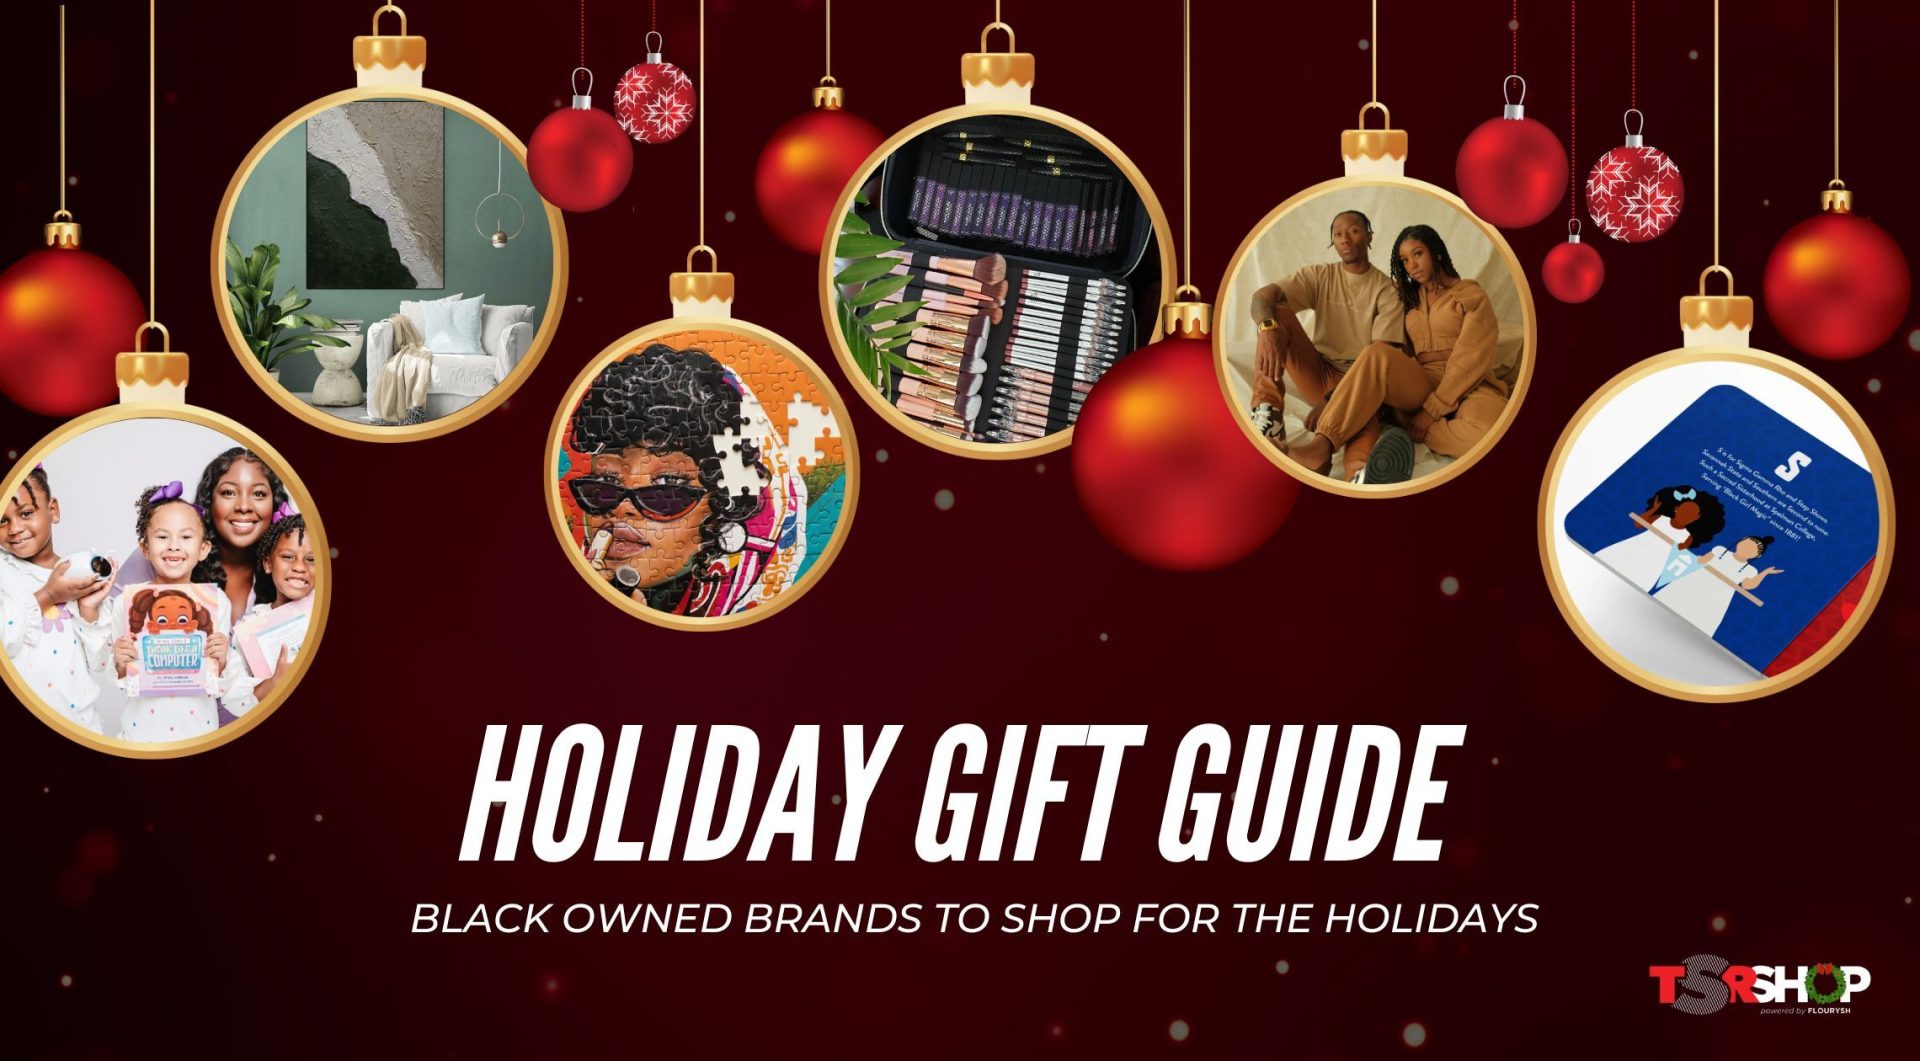 Issa Black-Owned Christmas! Here’s The Ultimate Holiday Gift Guide For Deals You’ll Love